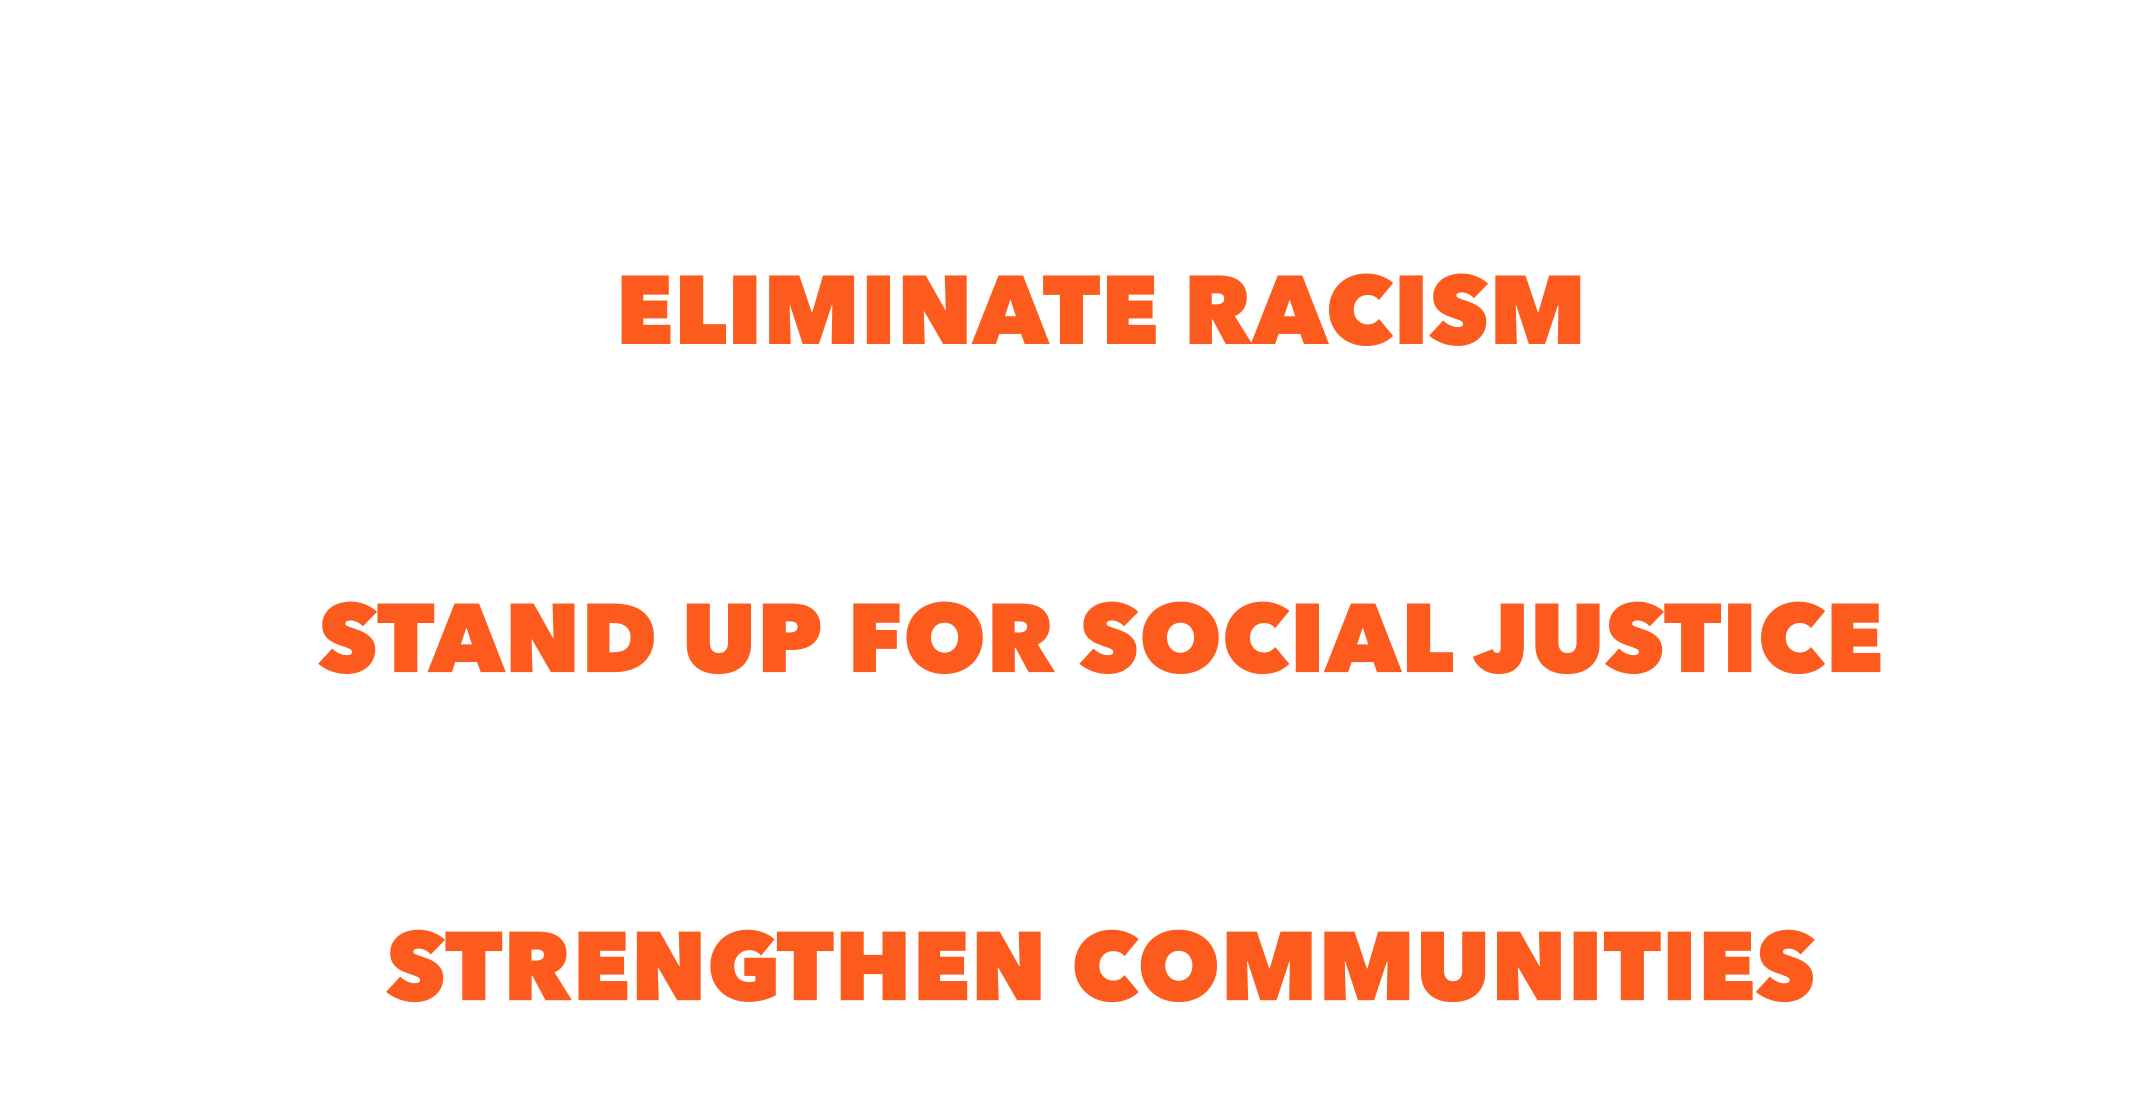 A Mission to: Eliminate Racism, Empower Women, Stand Up For Social Justice, Help Families, Strengthen Communities